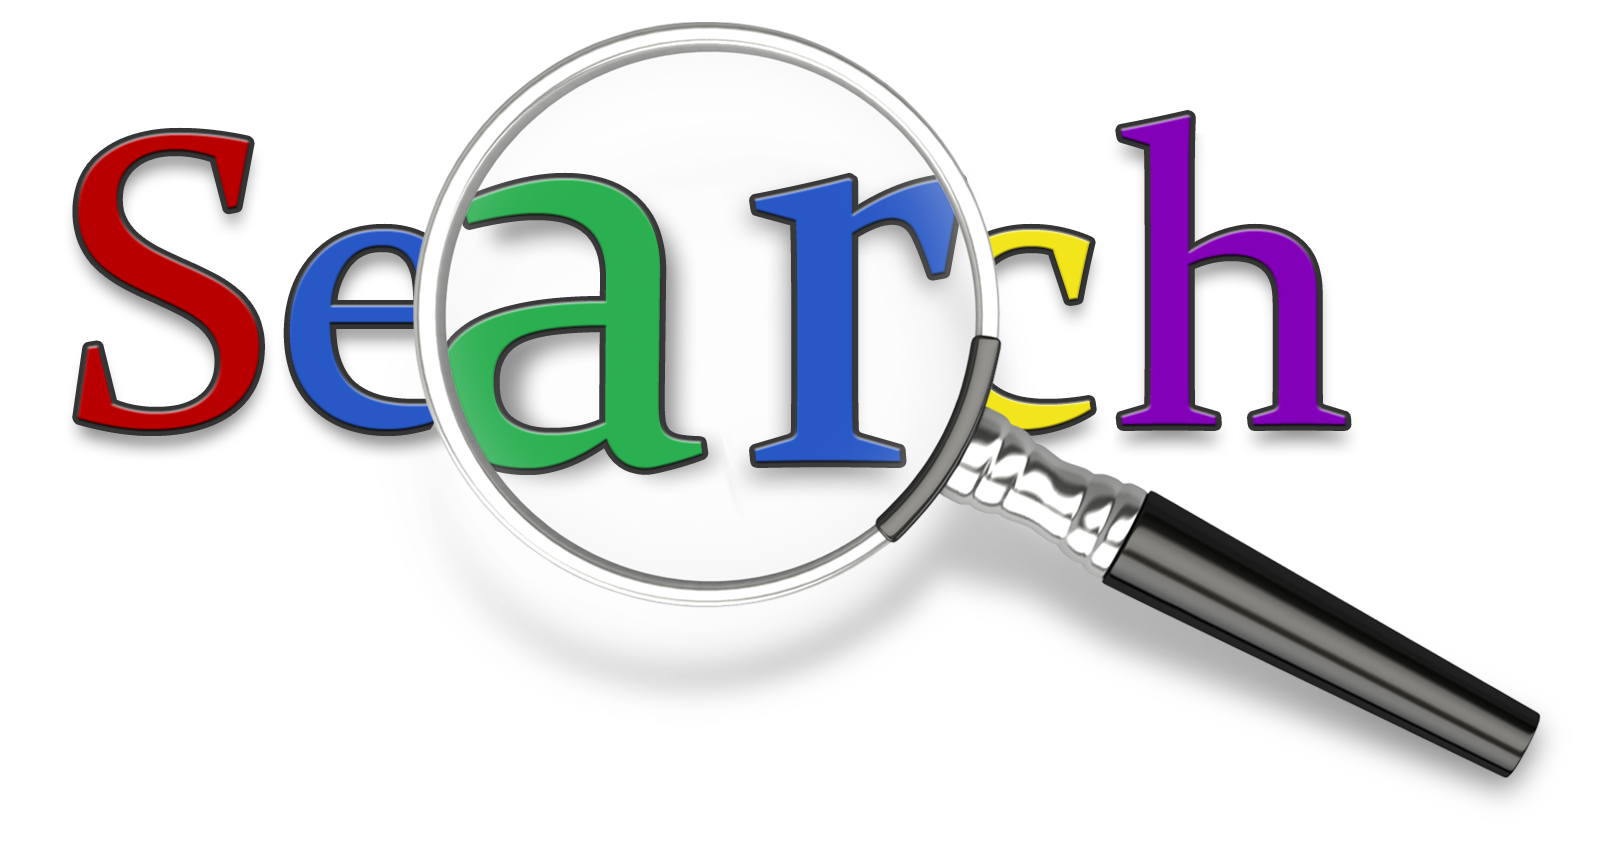 marketing clipart search engine